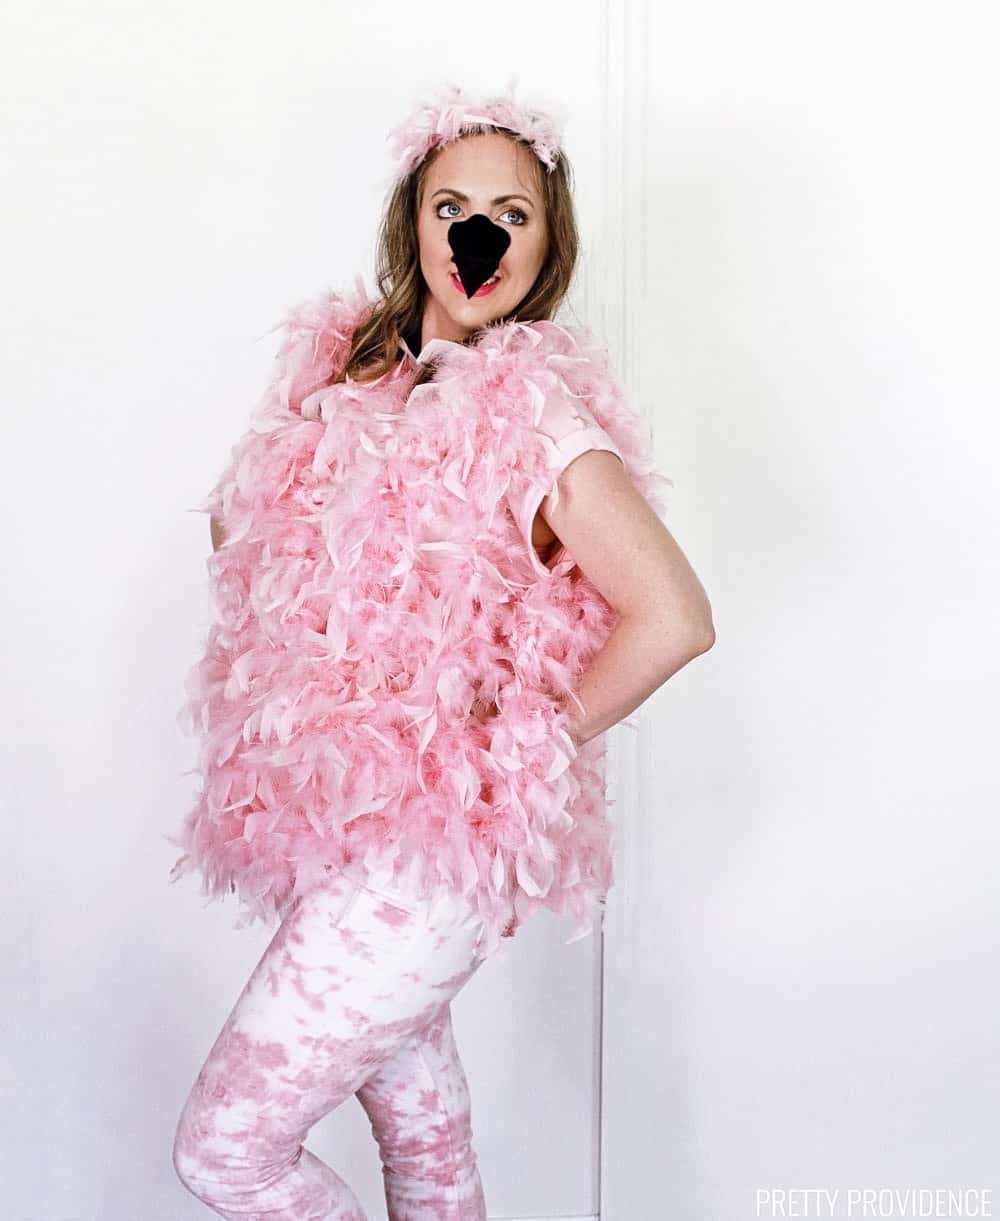 Woman wearing a flamingo costume for Halloween with pink boas, a felt flamingo nose, pink and white pants.